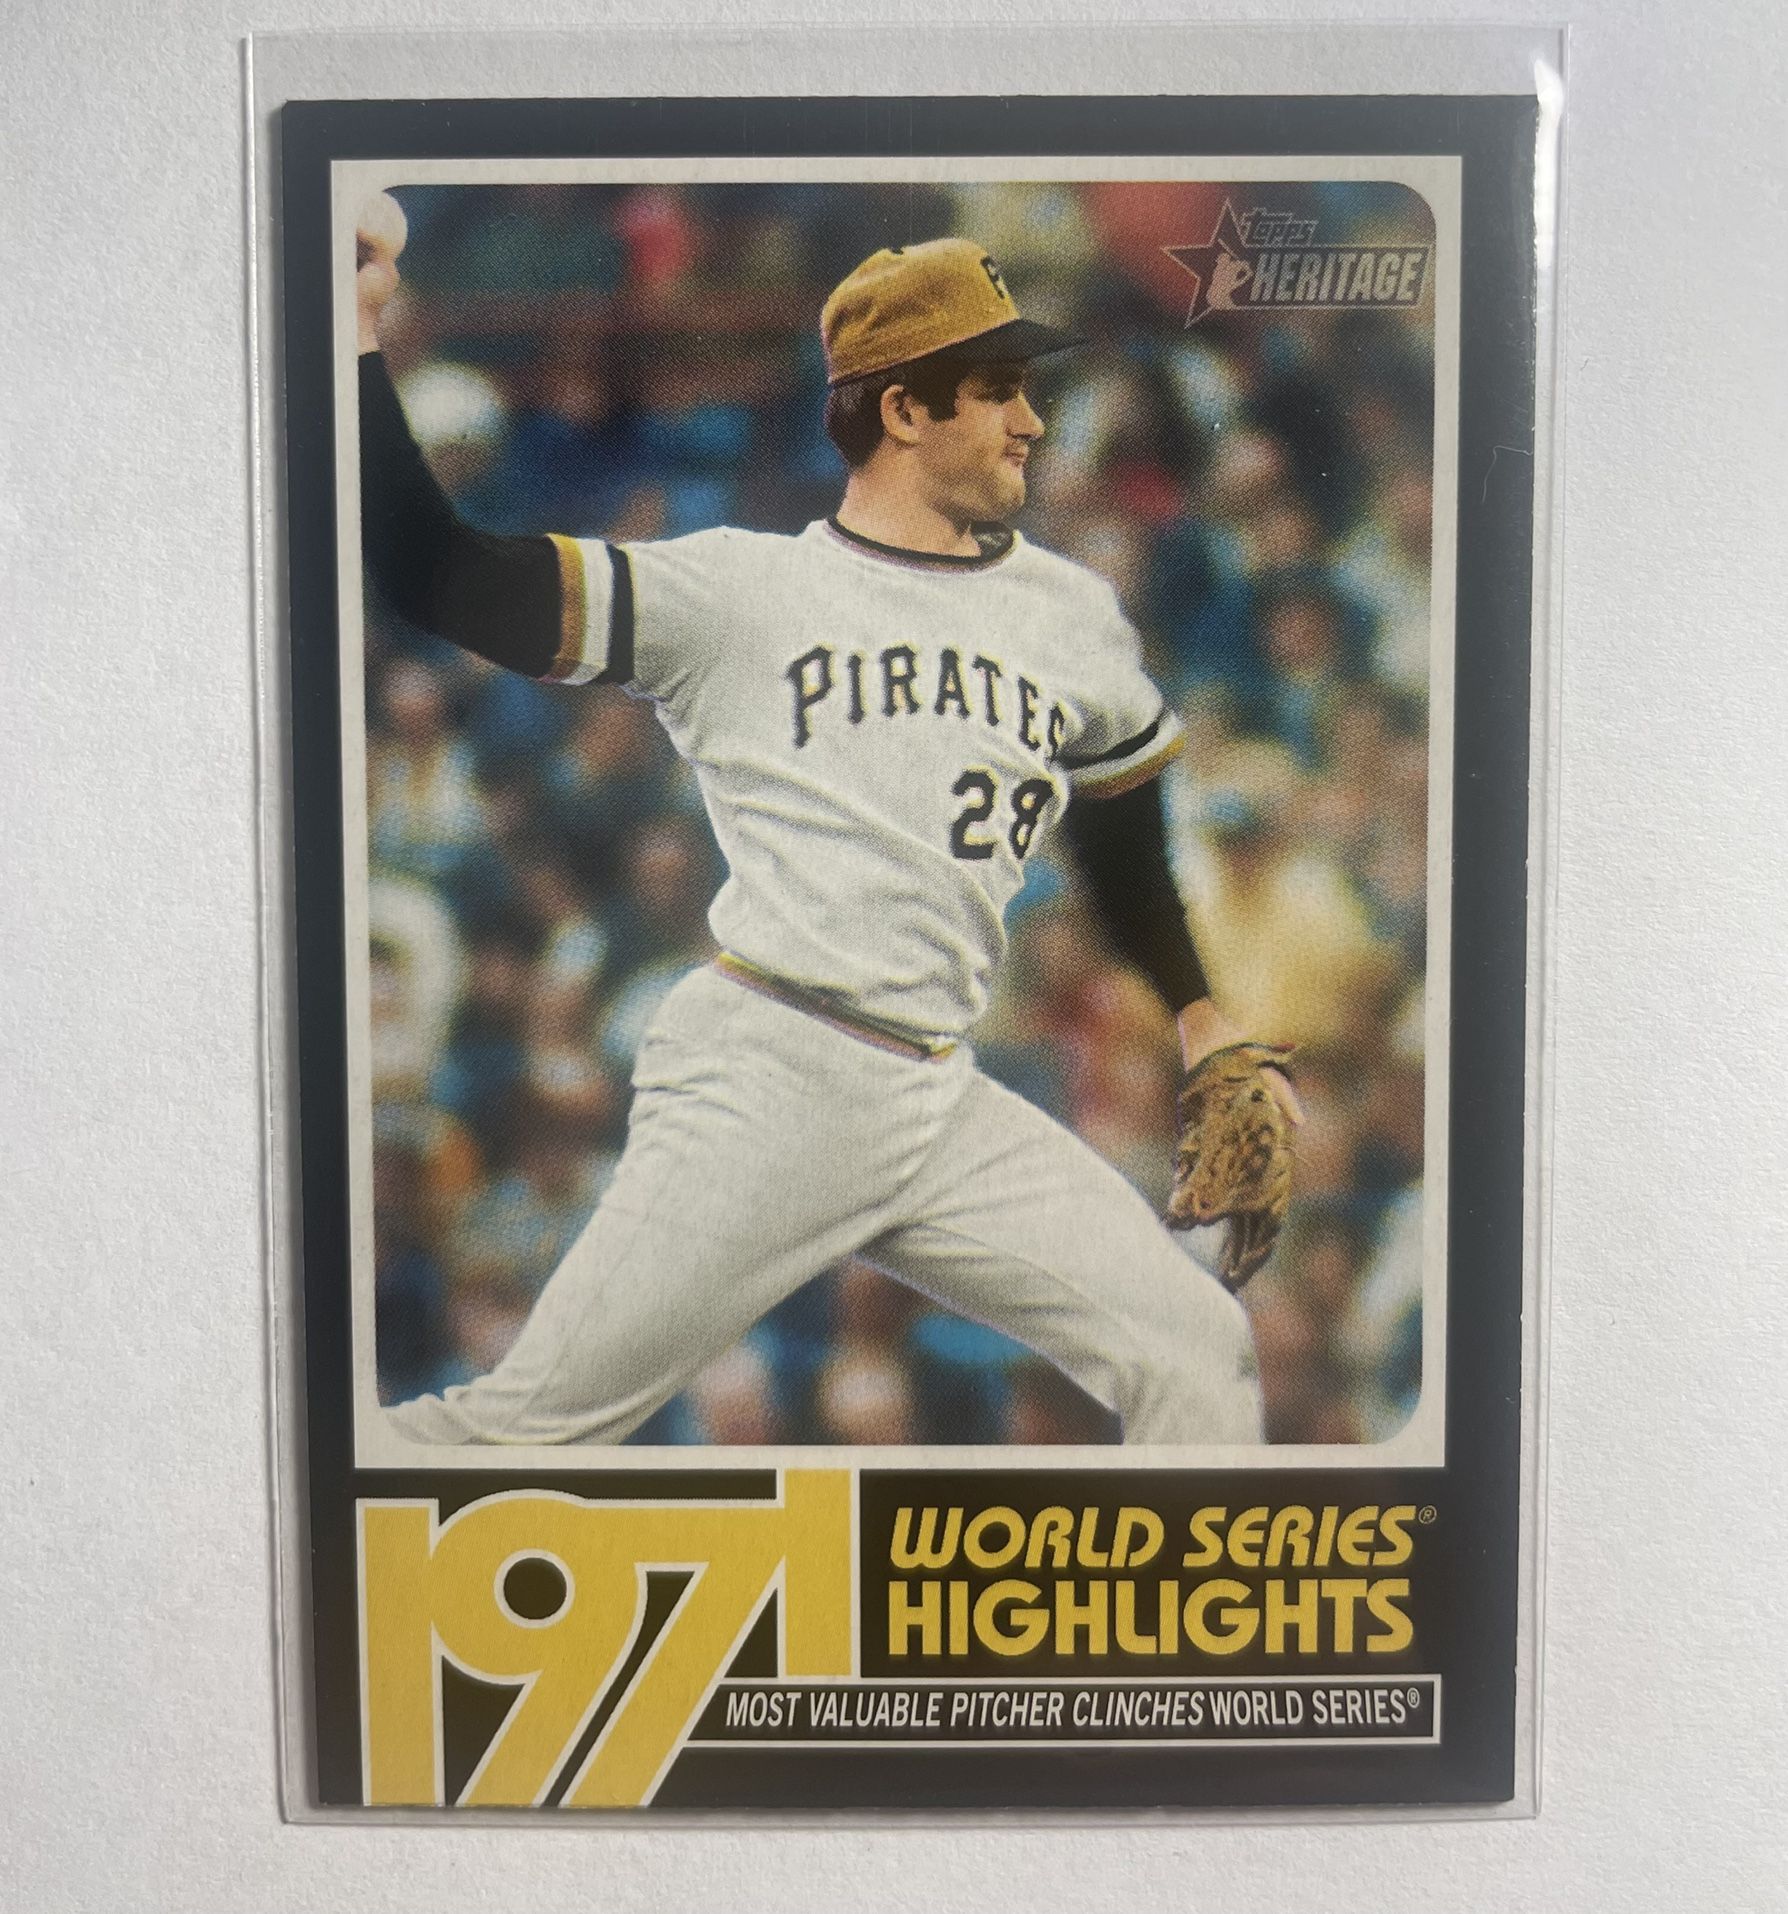 Mint 2020 Topps Heritage Baseball Steve Blass 1971 World Series Highlights SP Card #WSH-6 Most Valuable Pitcher Pittsburgh Pirates MLB